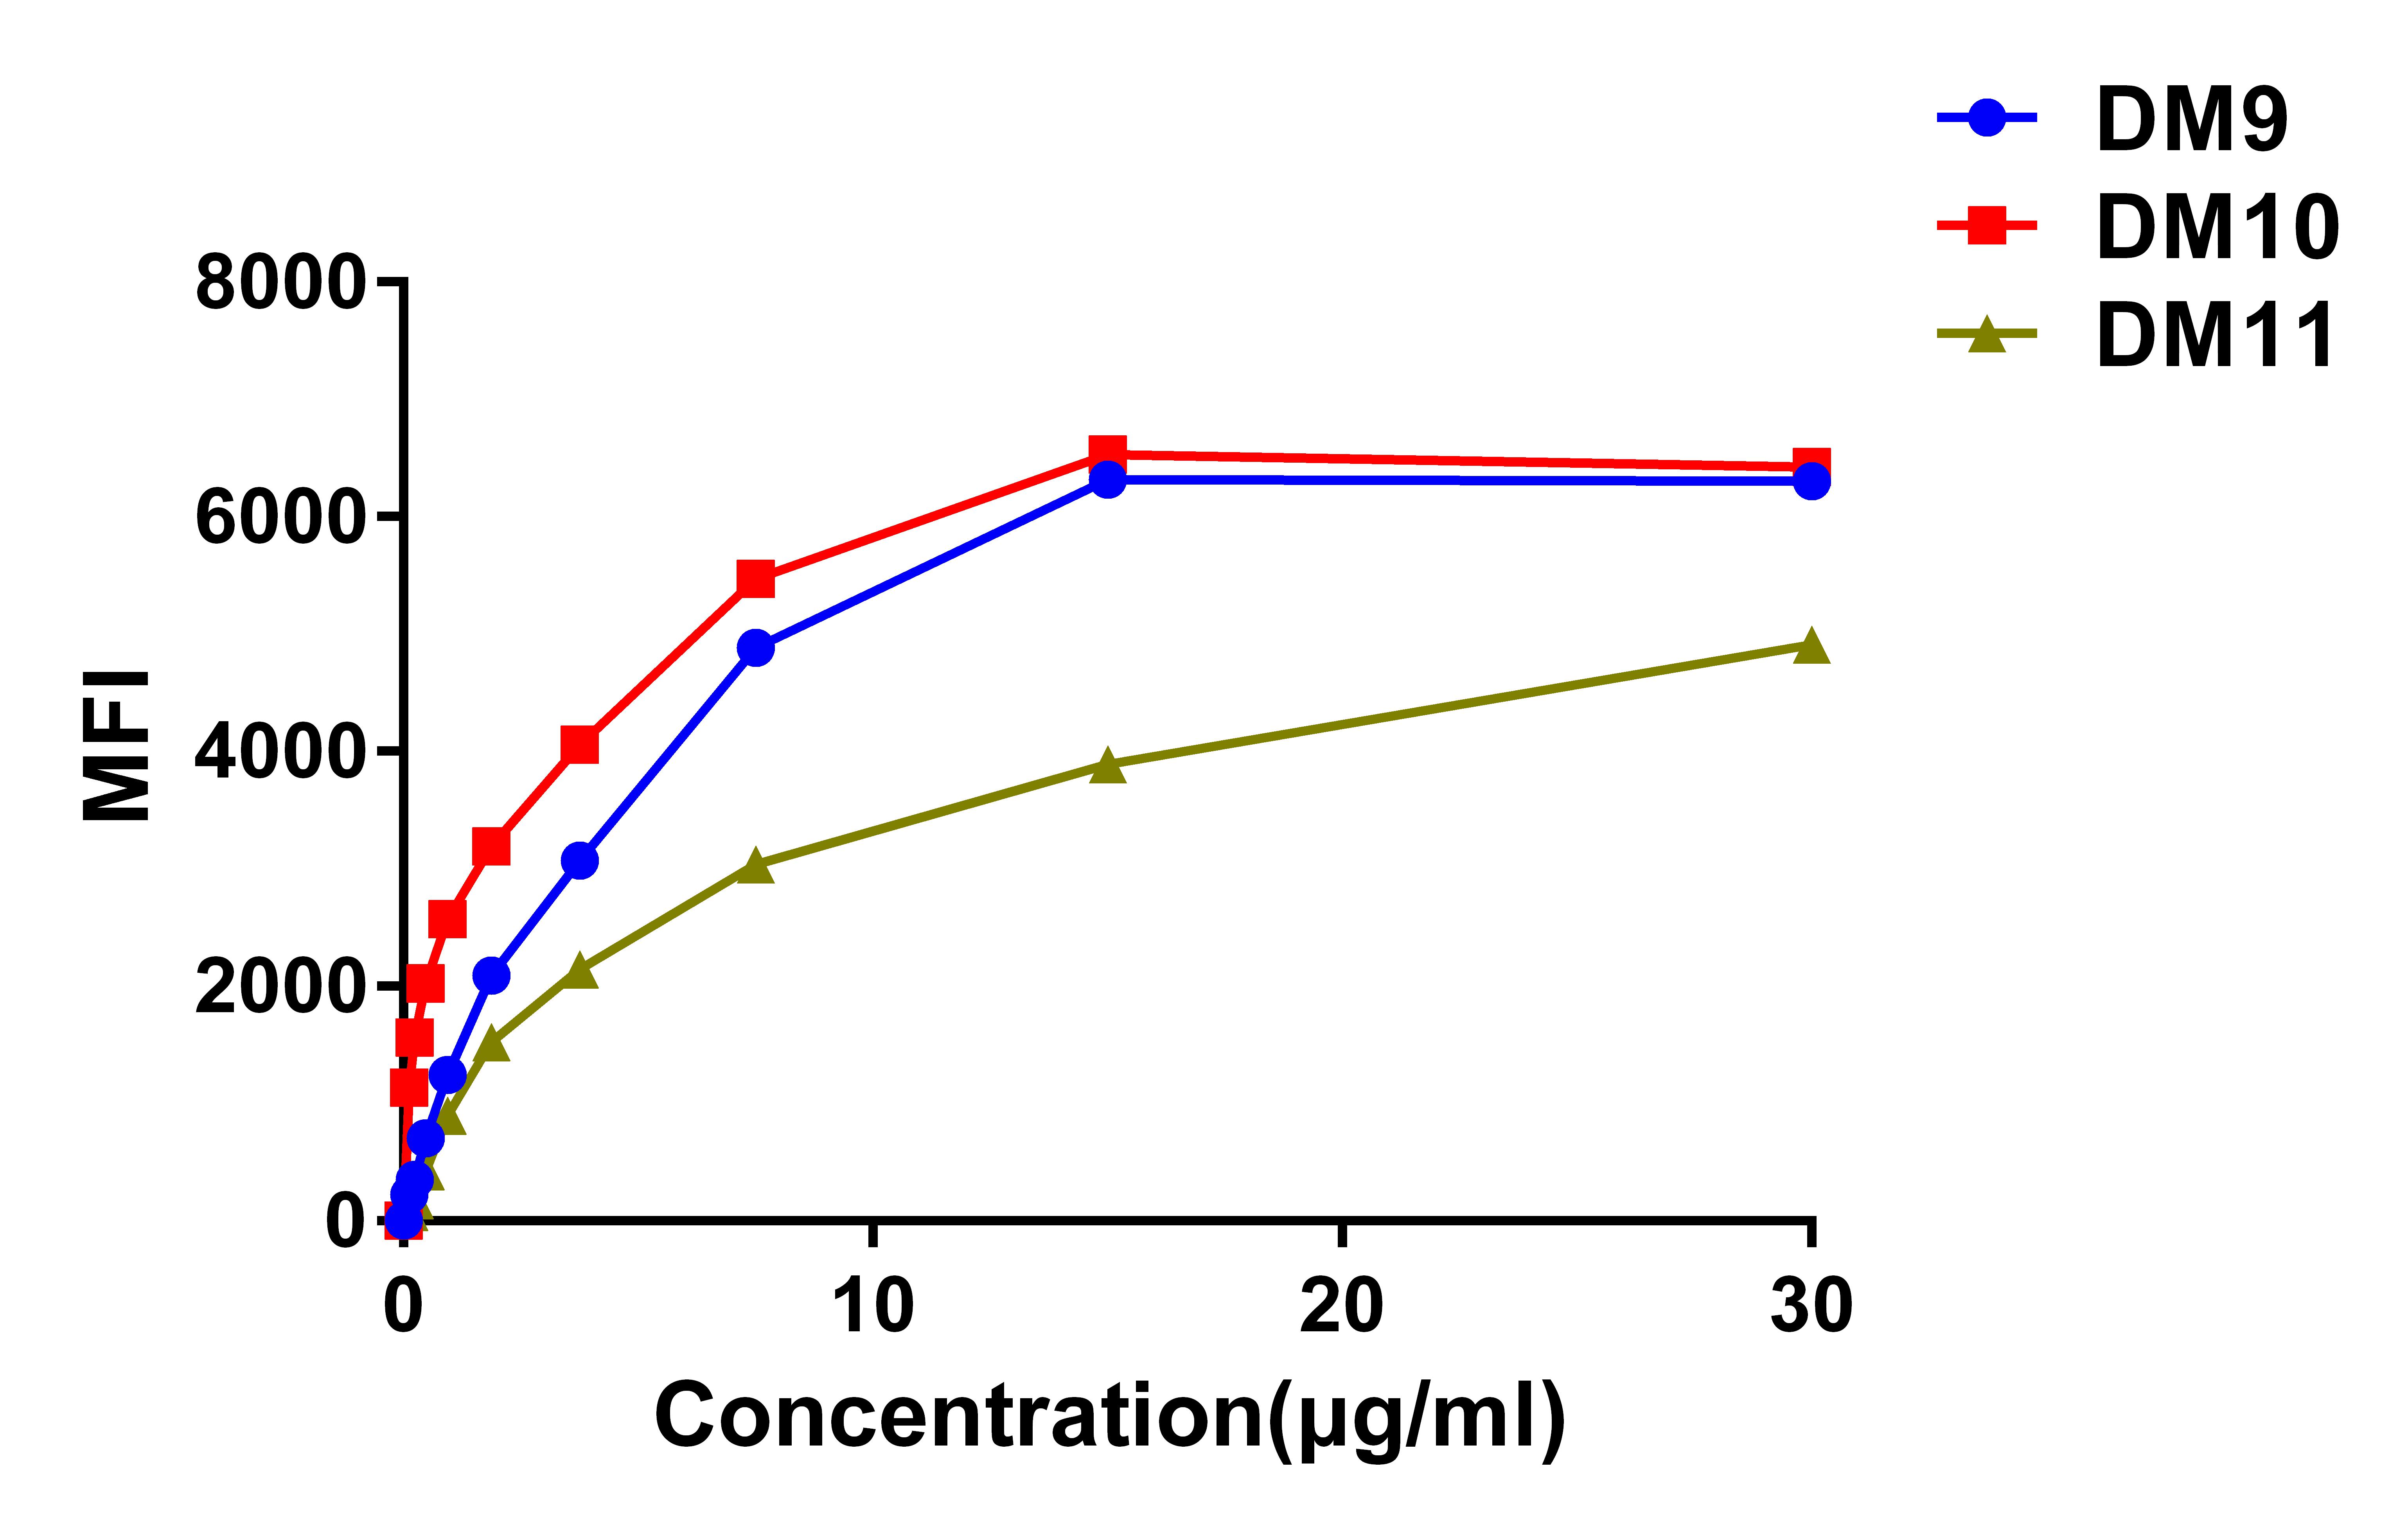 Figure 3. Affinity ranking of different Rabbit anti-CS1 mAb clones by titration of different concentration onto Raji cells. The Y-axis represents the mean fluorescence intensity (MFI) while the X-axis represents the concentration of IgG used.